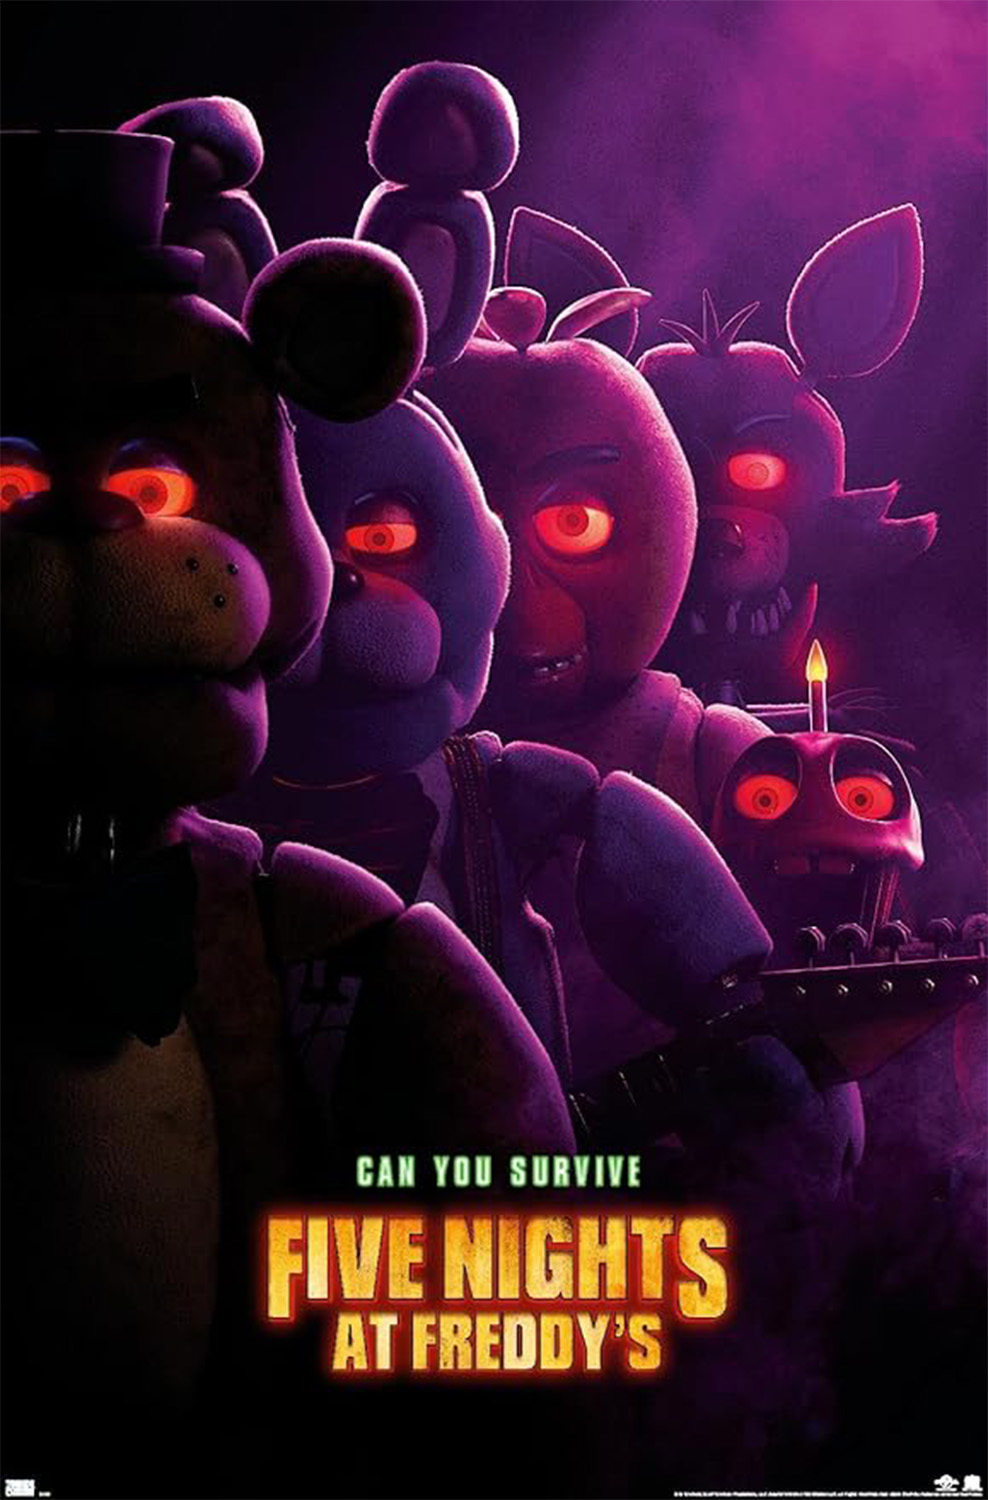 This poster is showcasing the characters Freddy, Bonnie, Chica, Foxy and Cupcake from new Five Nights at Freddys movie. By Blumhouse Productions.